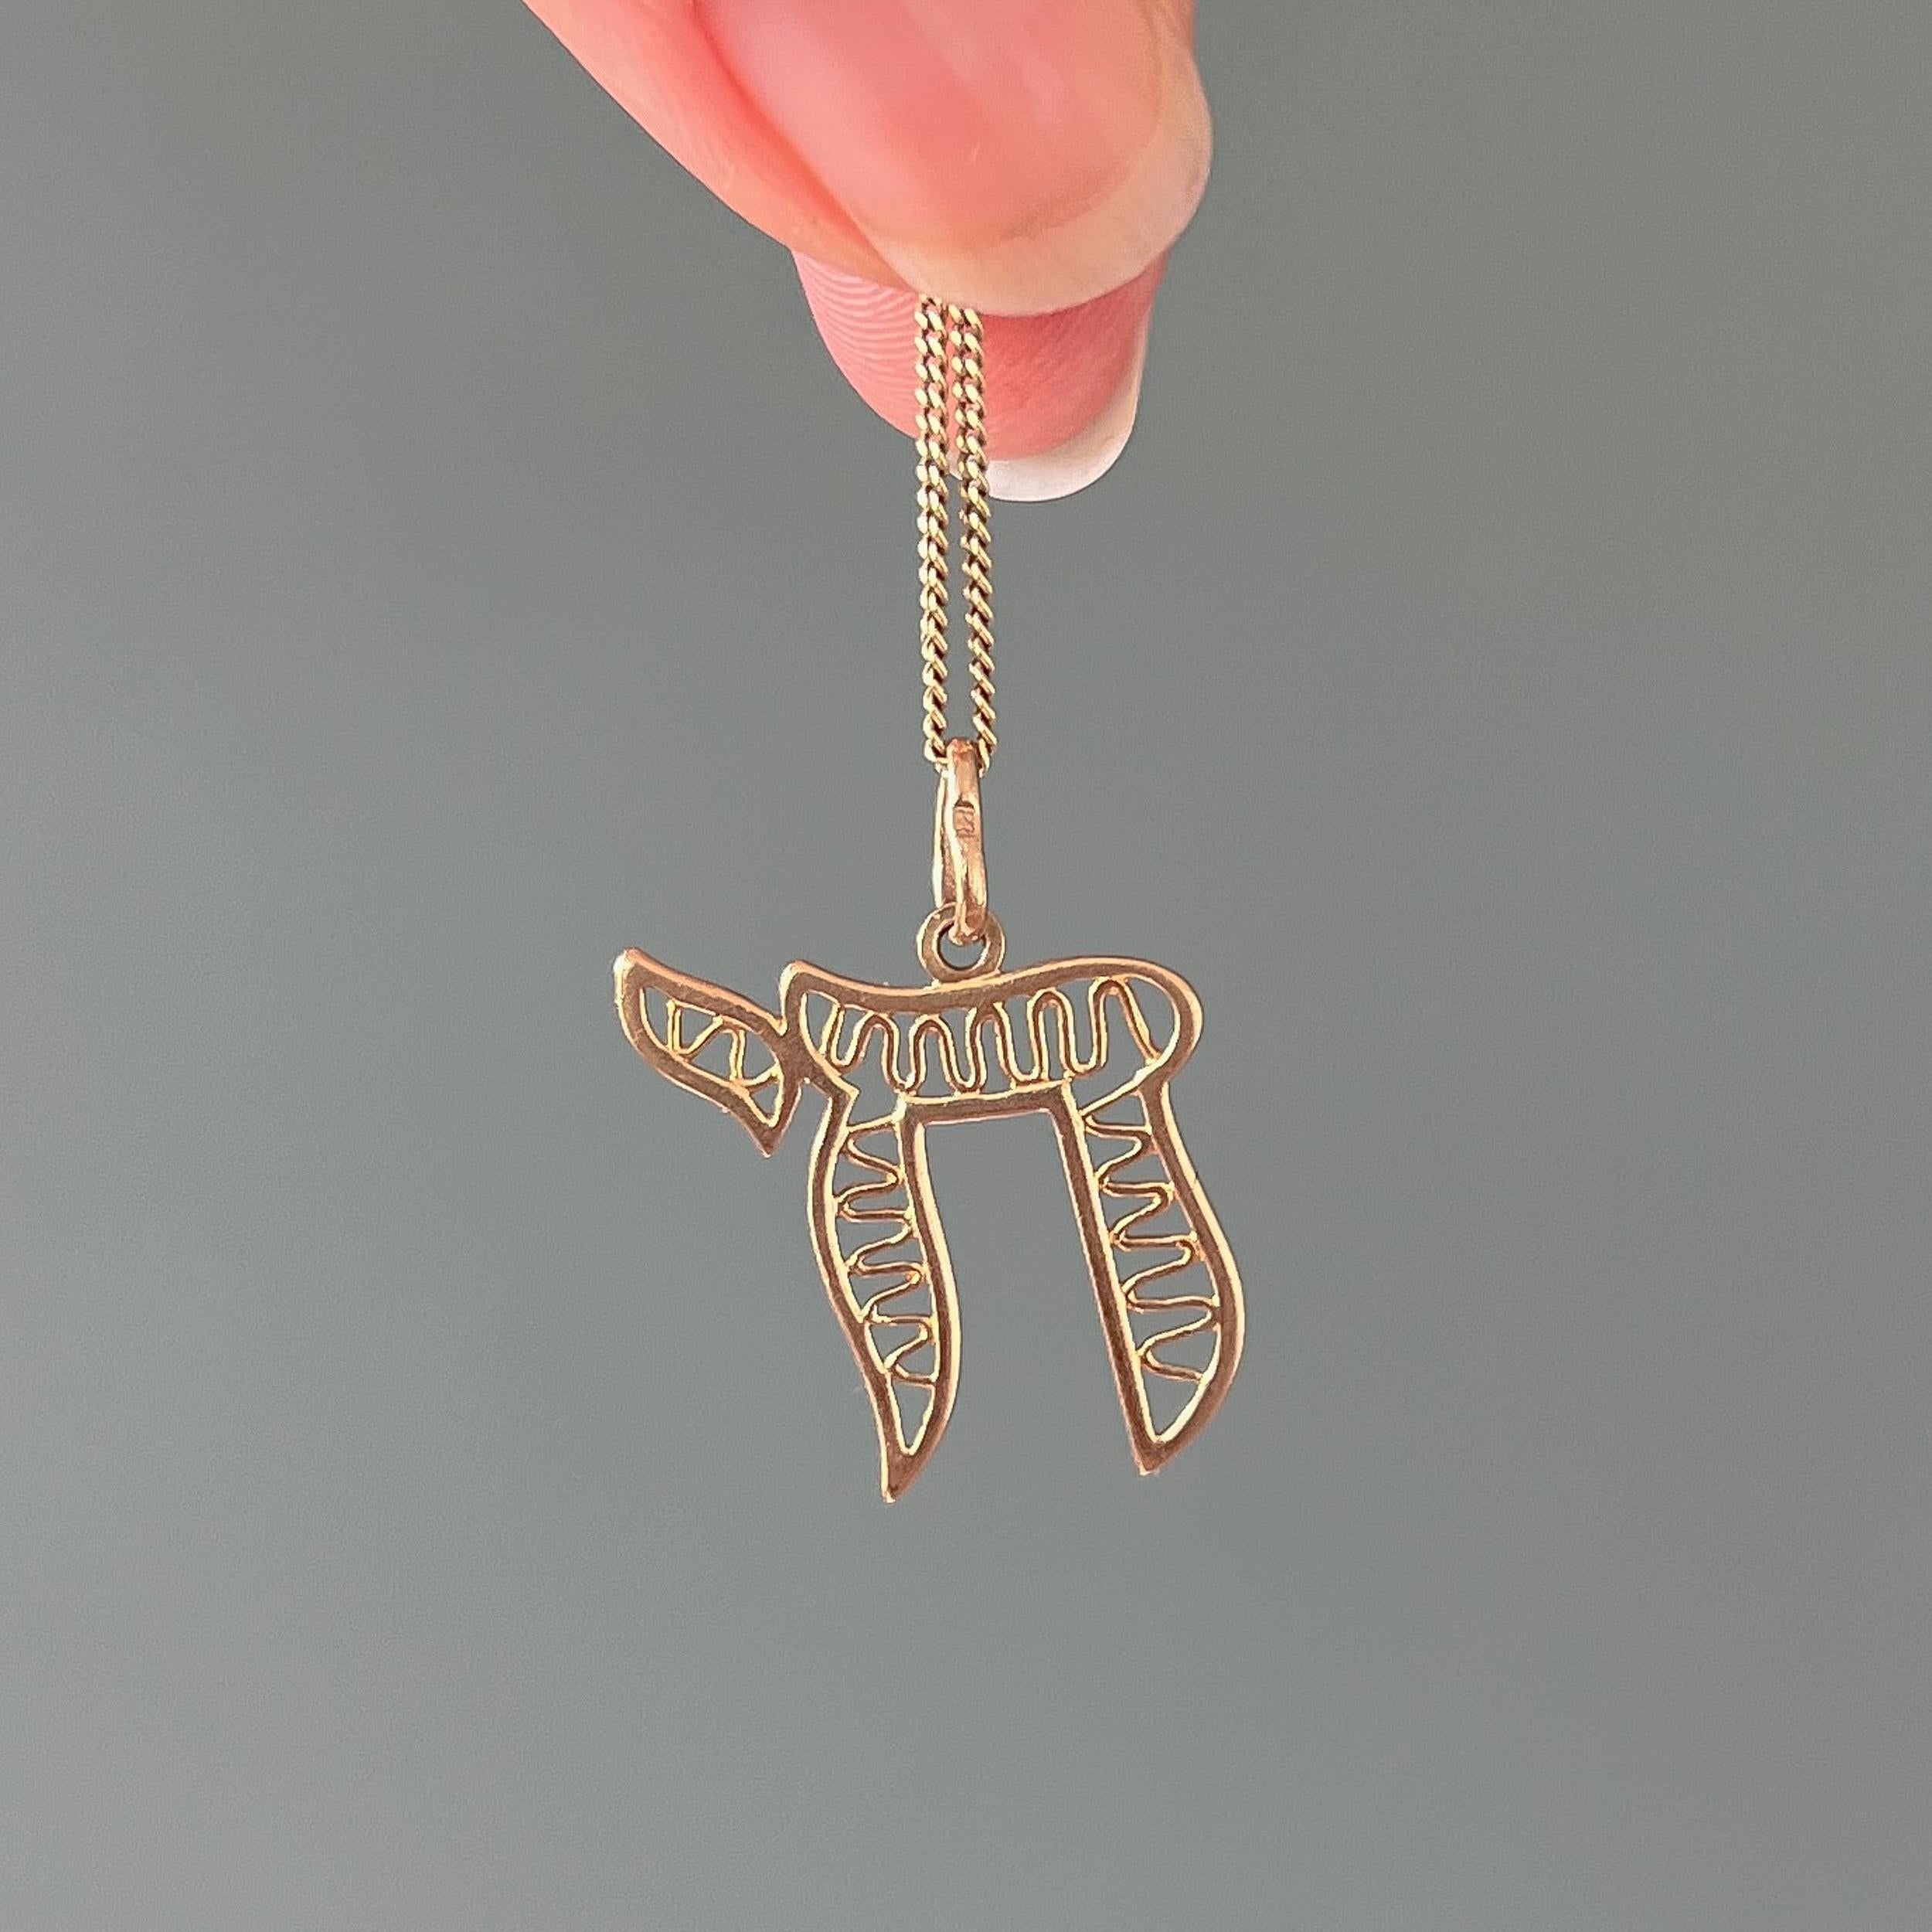 A vintage 9 karat yellow gold Chai amulet symbol charm pendant. The Chai, pronounced as 'khai' is a known Jewish and Hebrew word, symbol, amulet and a blessing. A symbol that was first seen in the Middle Ages in Spain became an integral part of